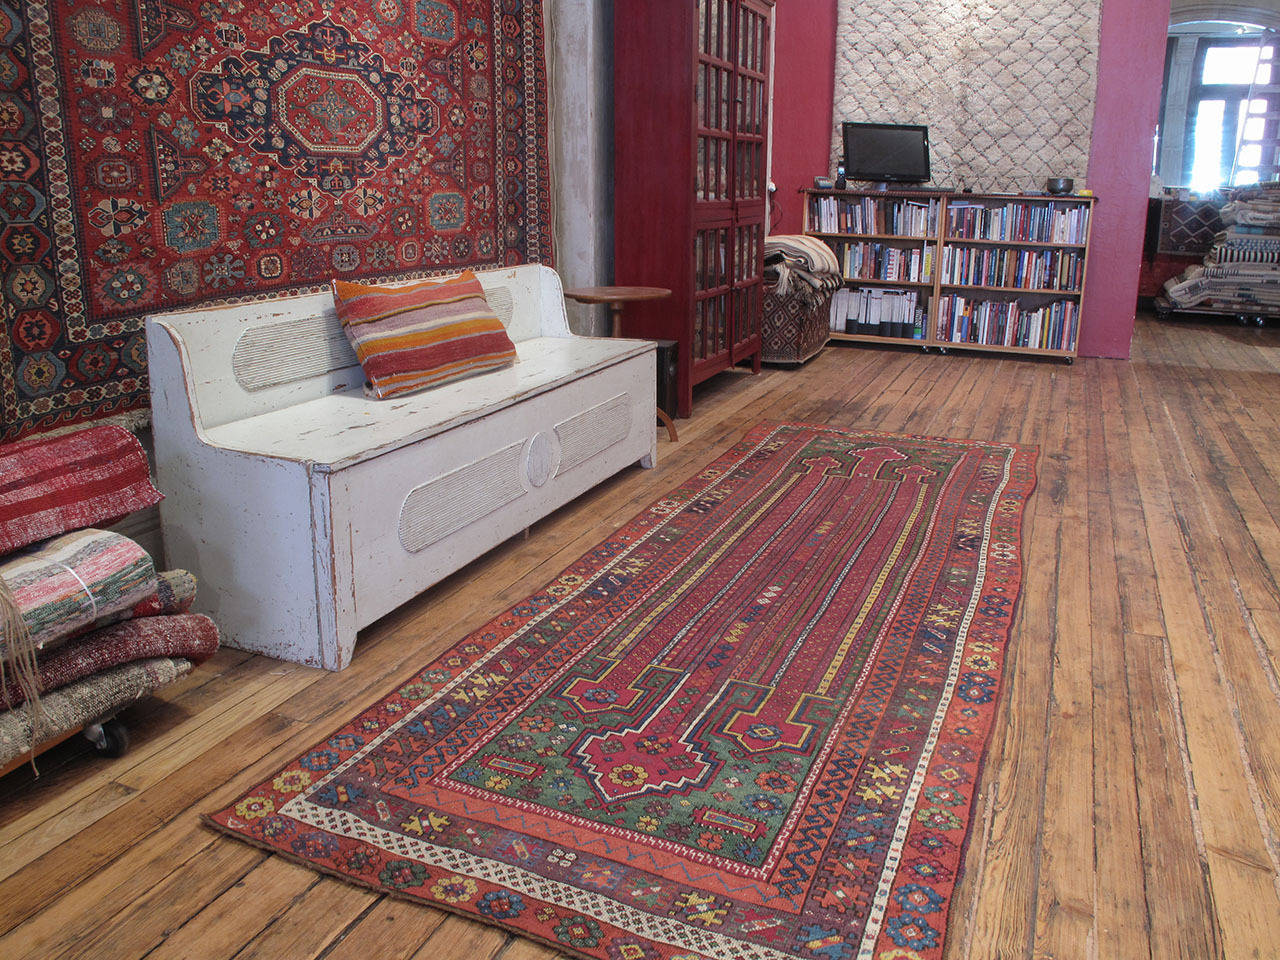 Antique East Anatolian long runner rug. A great antique village rug from Eastern Turkey with considerable age and a highly unusual and intriguing design. The pile of the rug is knotted in angora (mohair), rather than wool, another unusual feature.